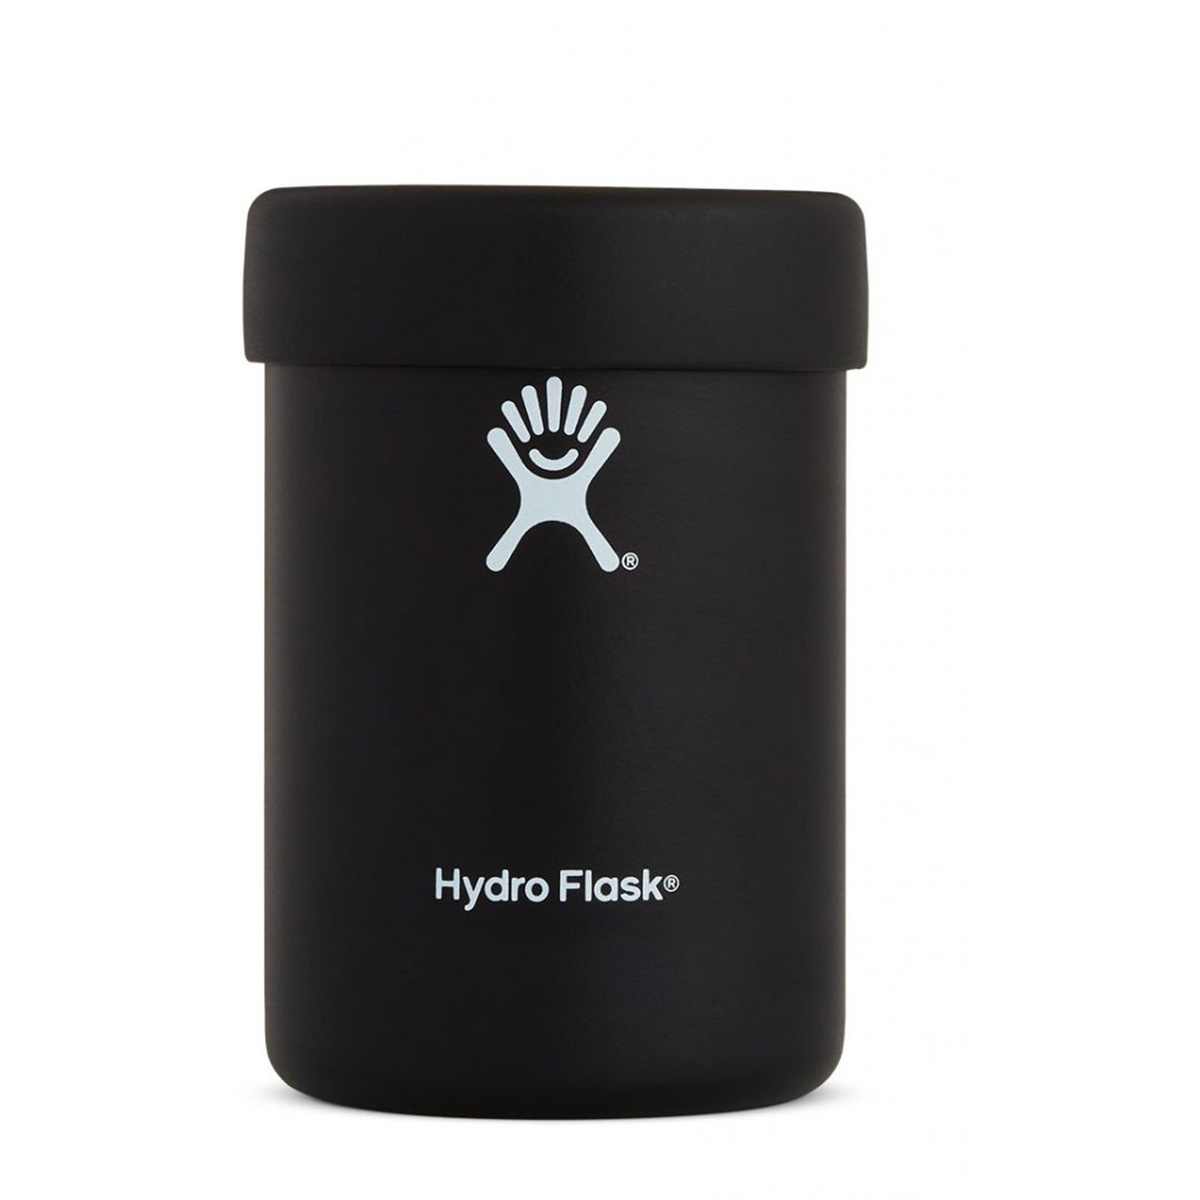 Image of Hydro Flask Tazza 12oz Cooler